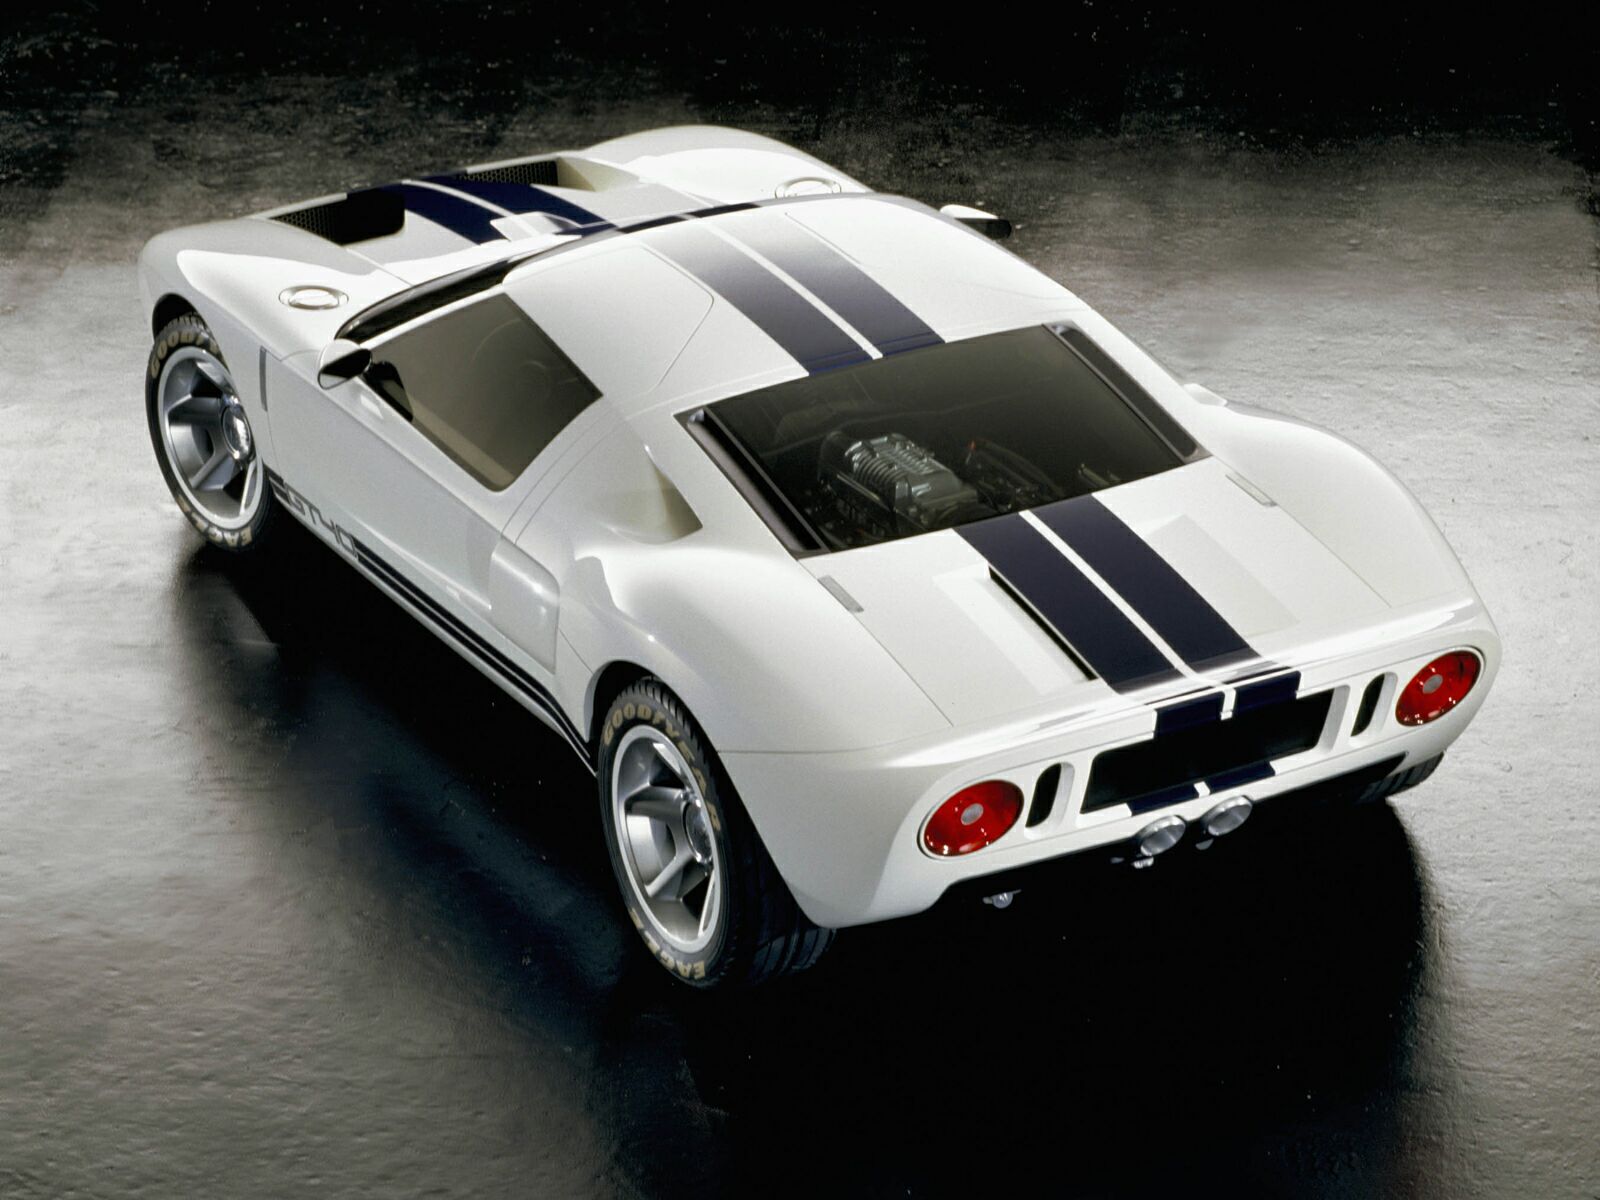 The Ford GT was the Ford plant